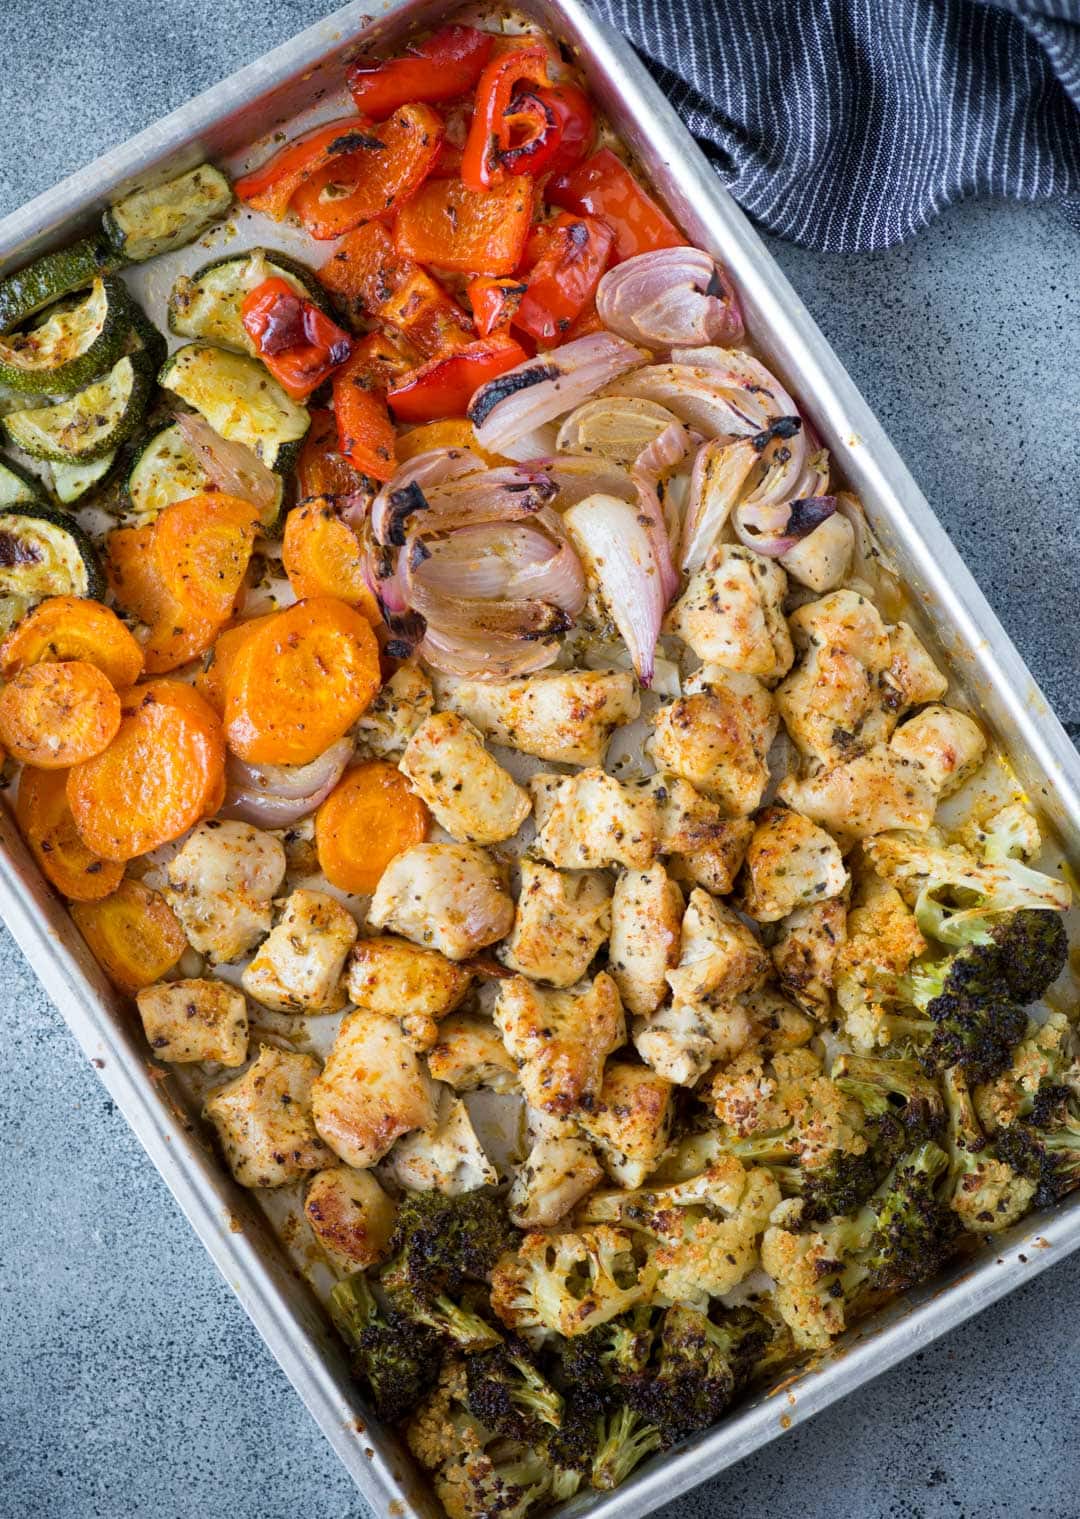 Roasted vegetables are super easy to make .Oven Roasted Vegetables with Chicken is vegetables, chicken tossed in butter, Italian seasoning and roasted until charred and tender.